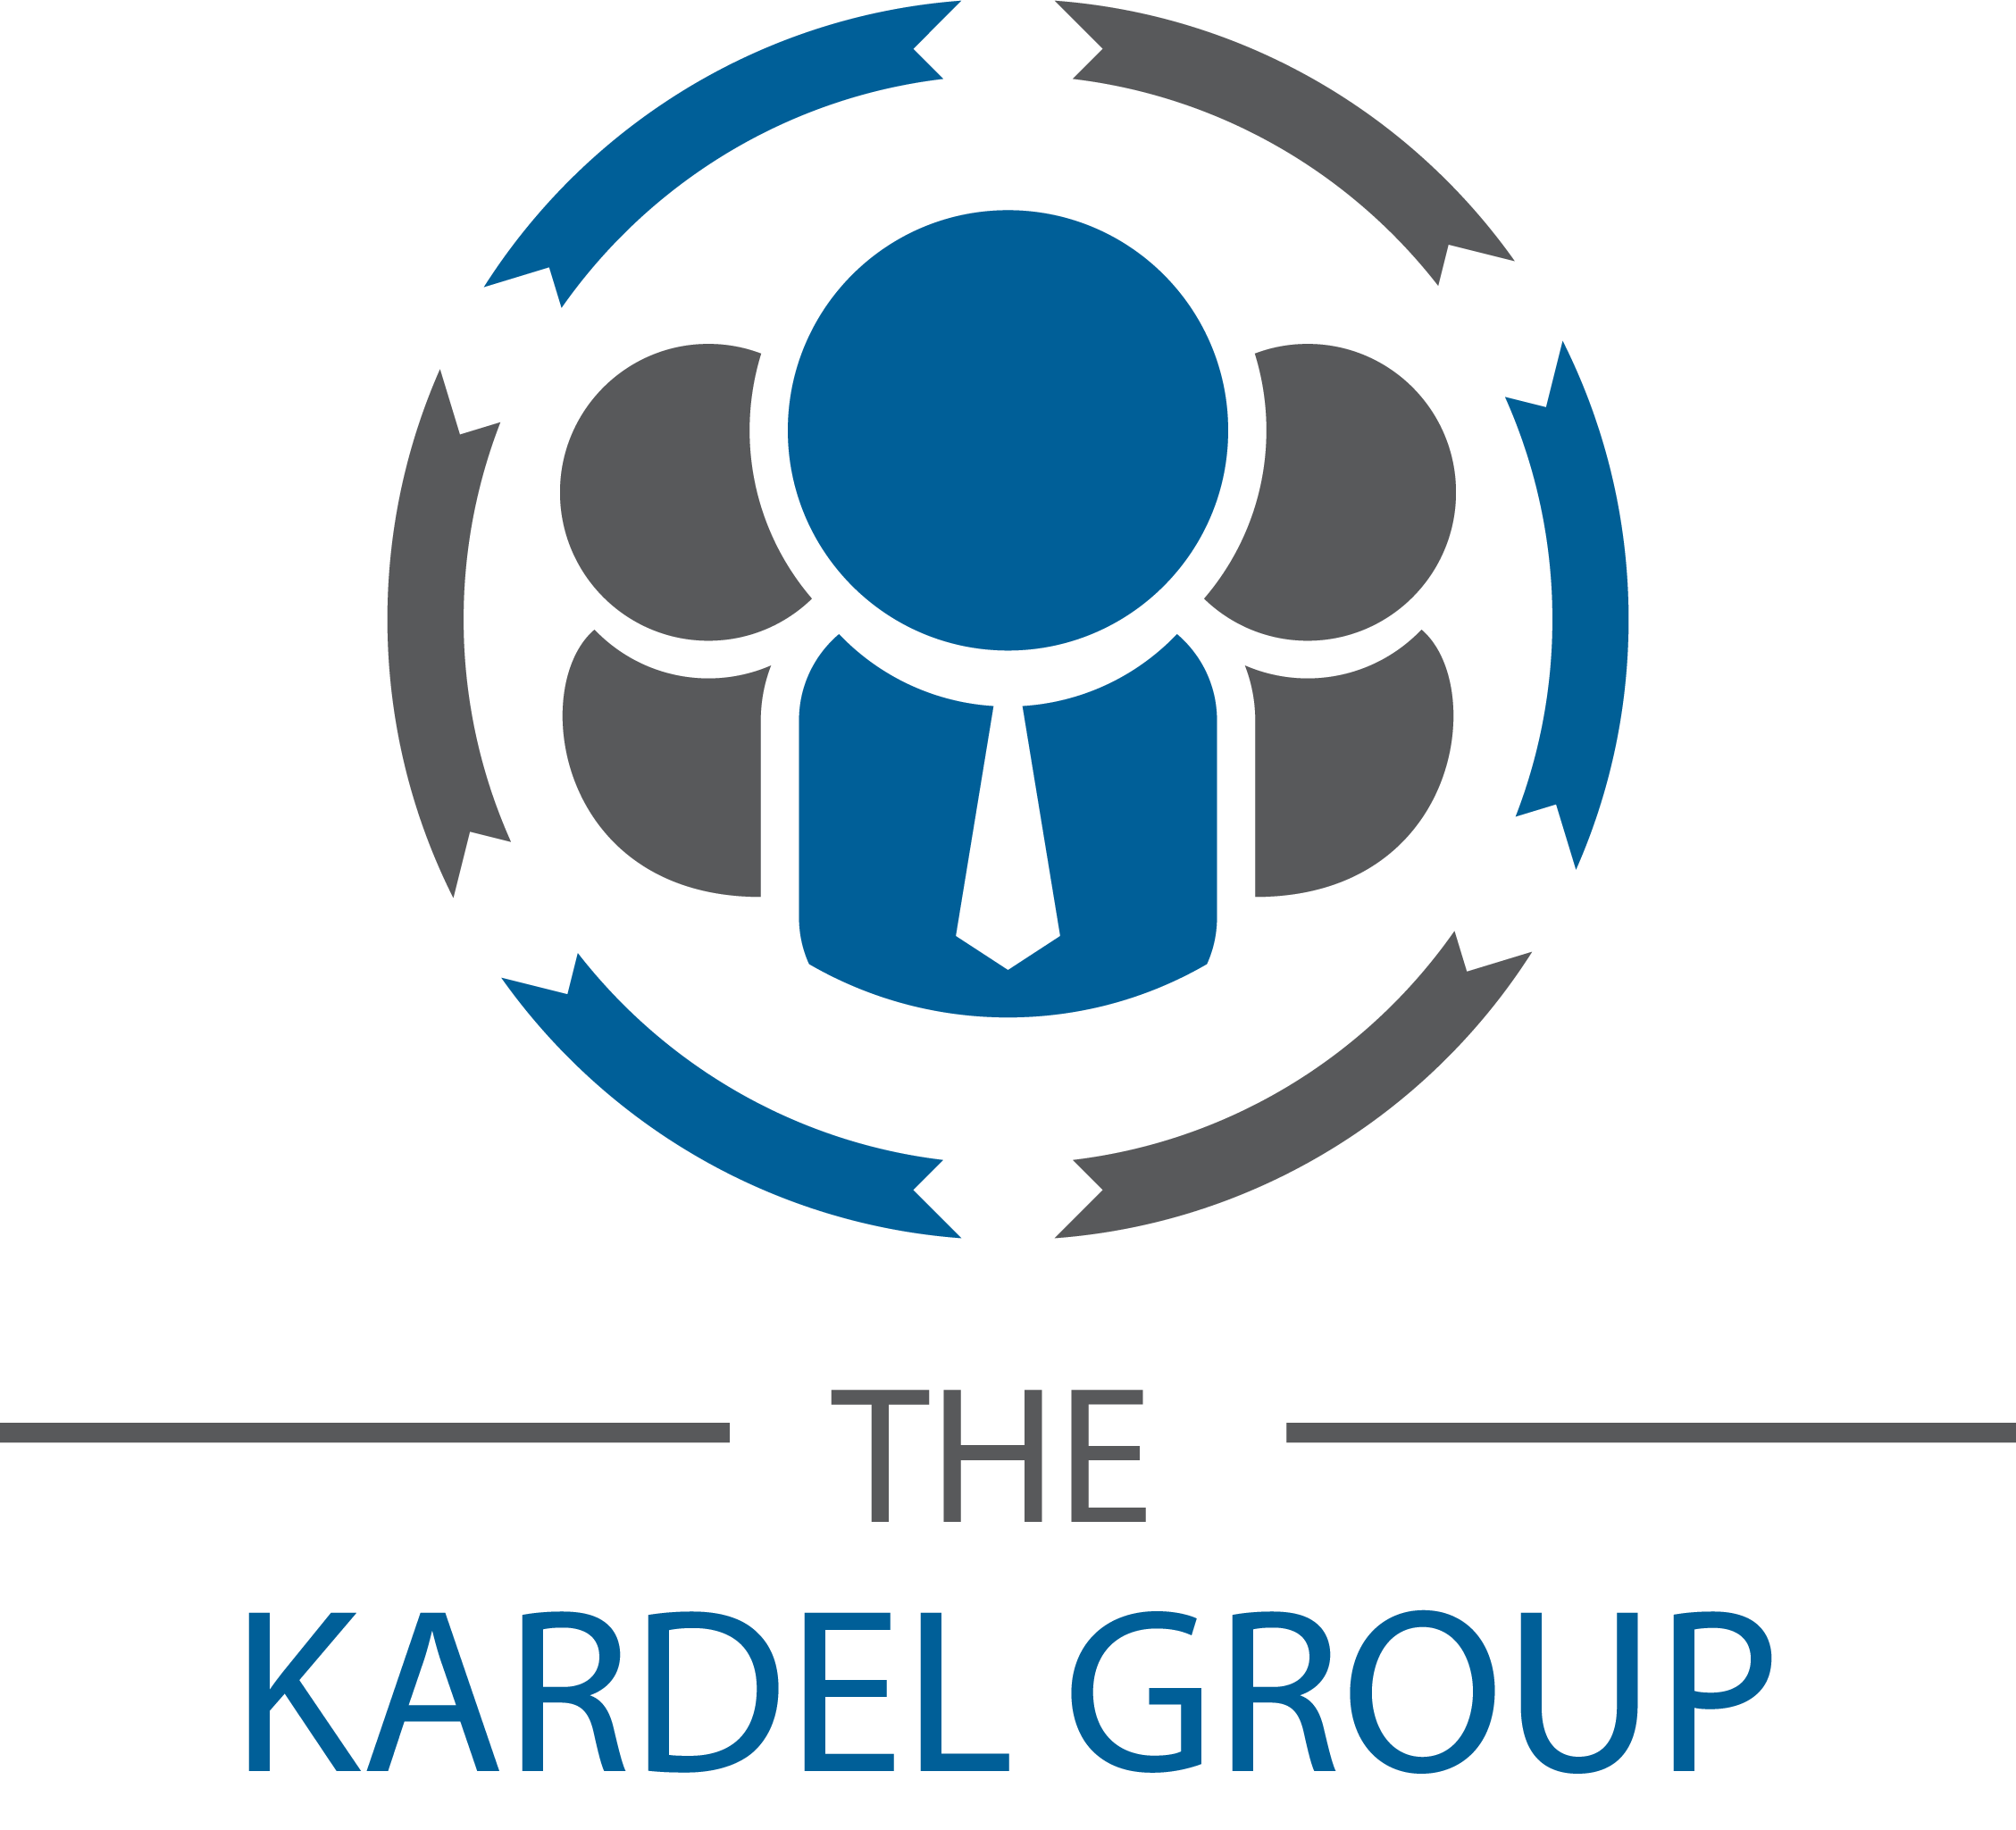 The Kardel Group